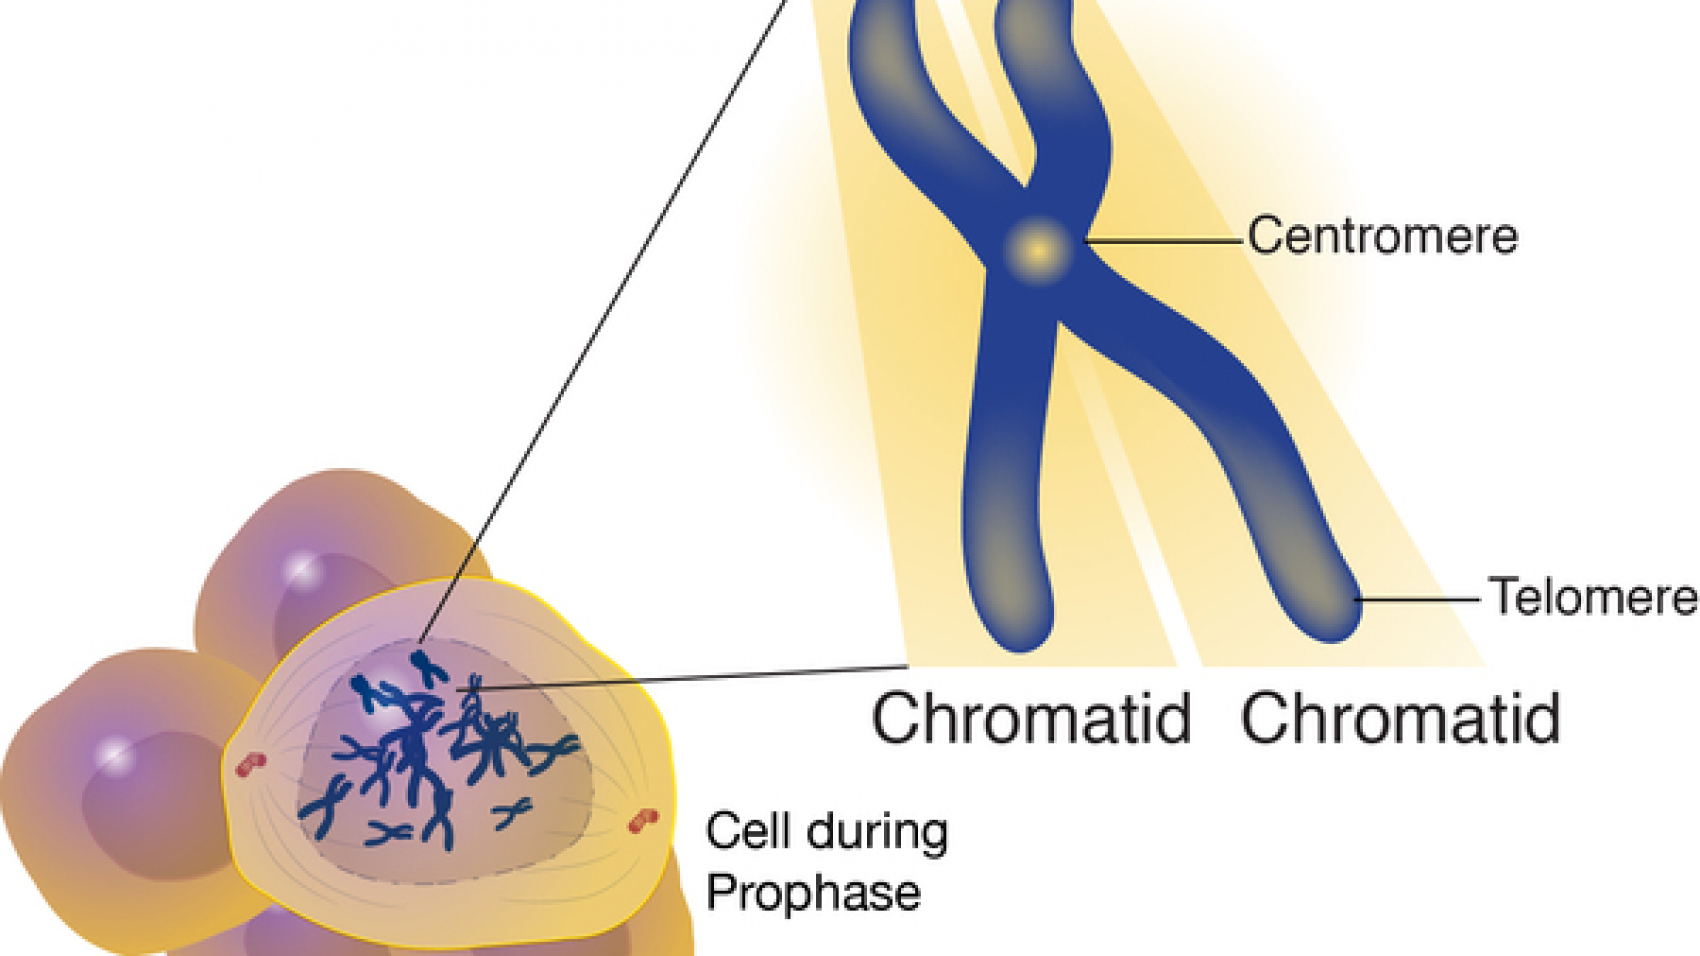 A chromatid is one of two identical halves of a replicated chromosome. During cell division, the chromosomes first replicate so that each daughter cell receives a complete set of chromosomes. Following DNA replication, the chromosome consists of two identical structures called sister chromatids, which are joined at the centromere.